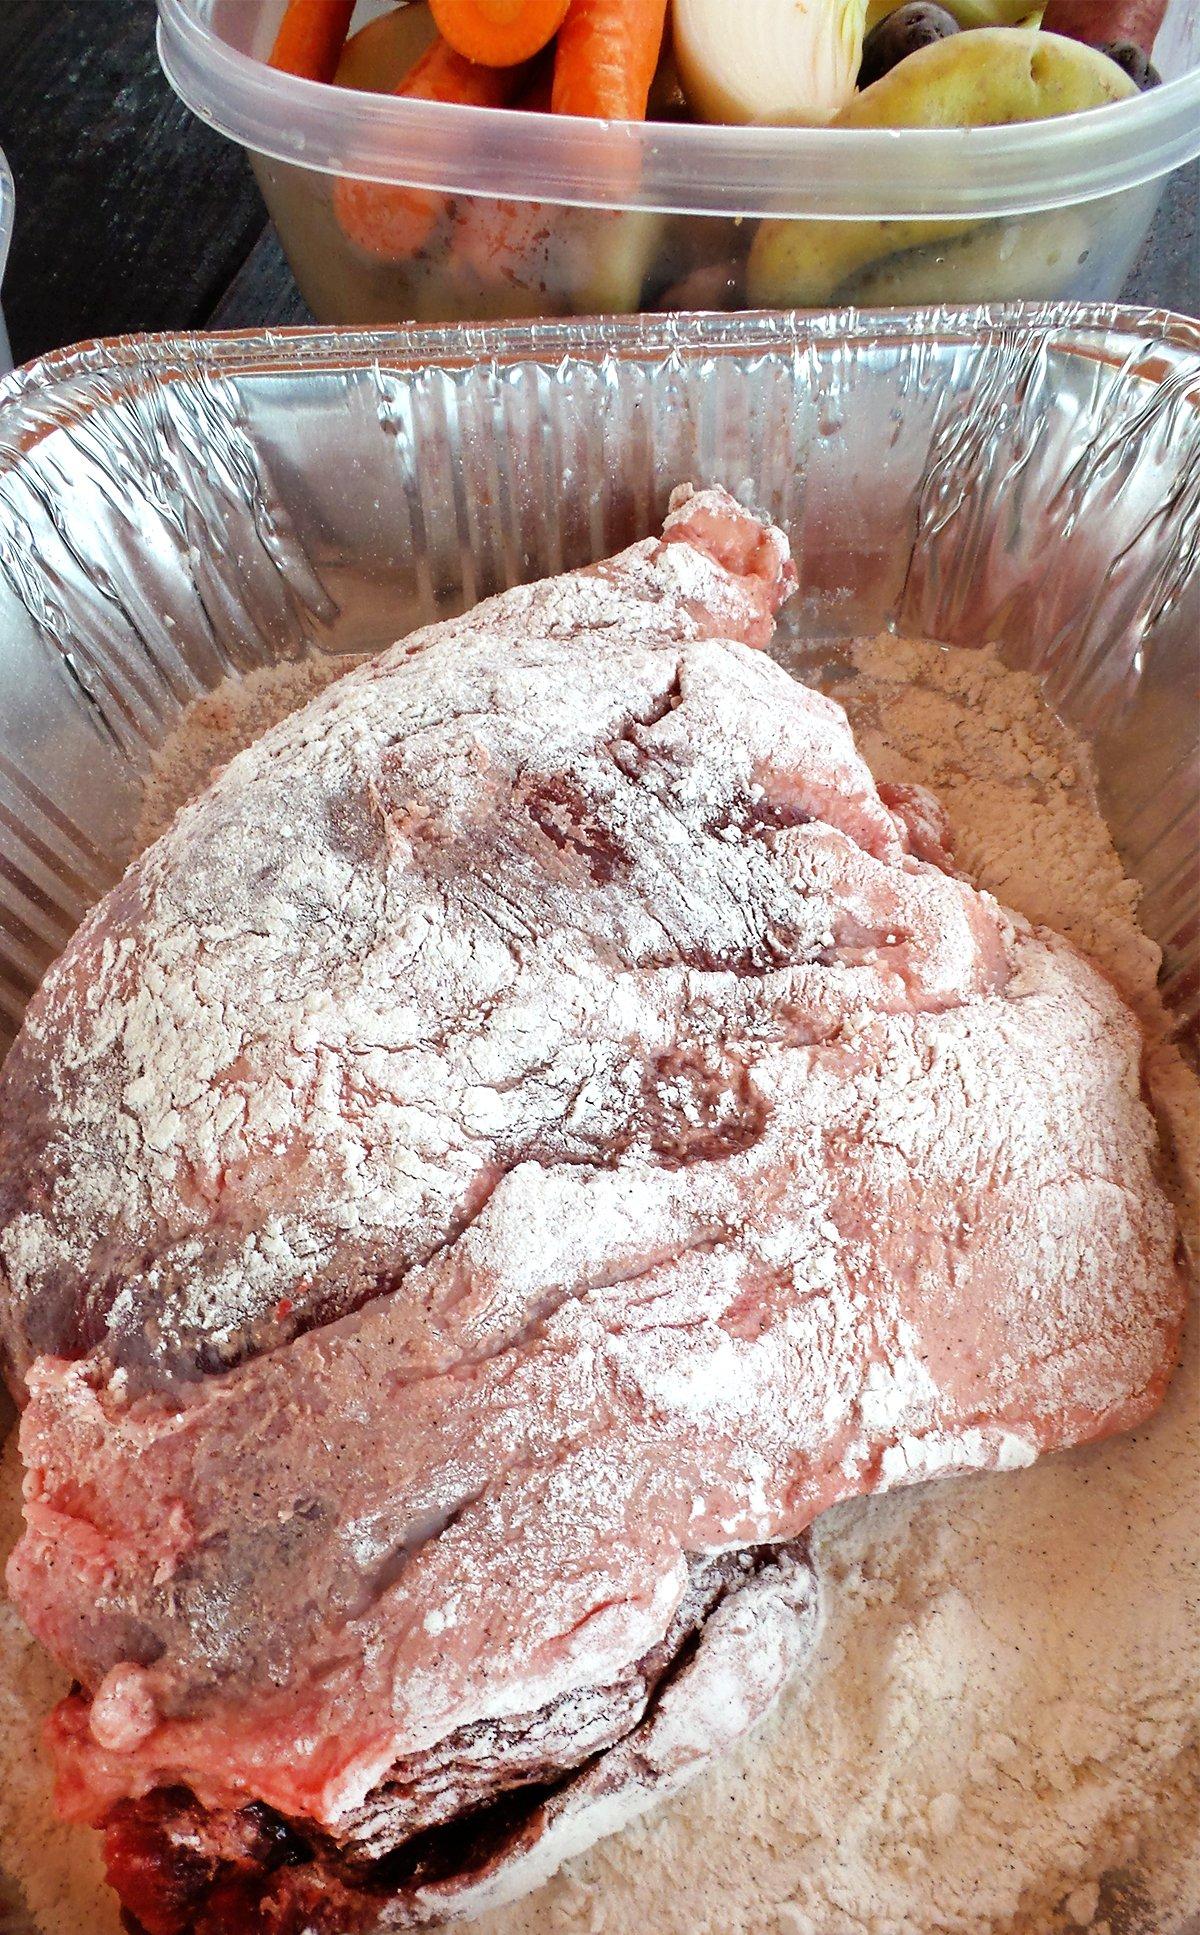 Dust the beaver meat in seasoned flour before browning it the Dutch oven.